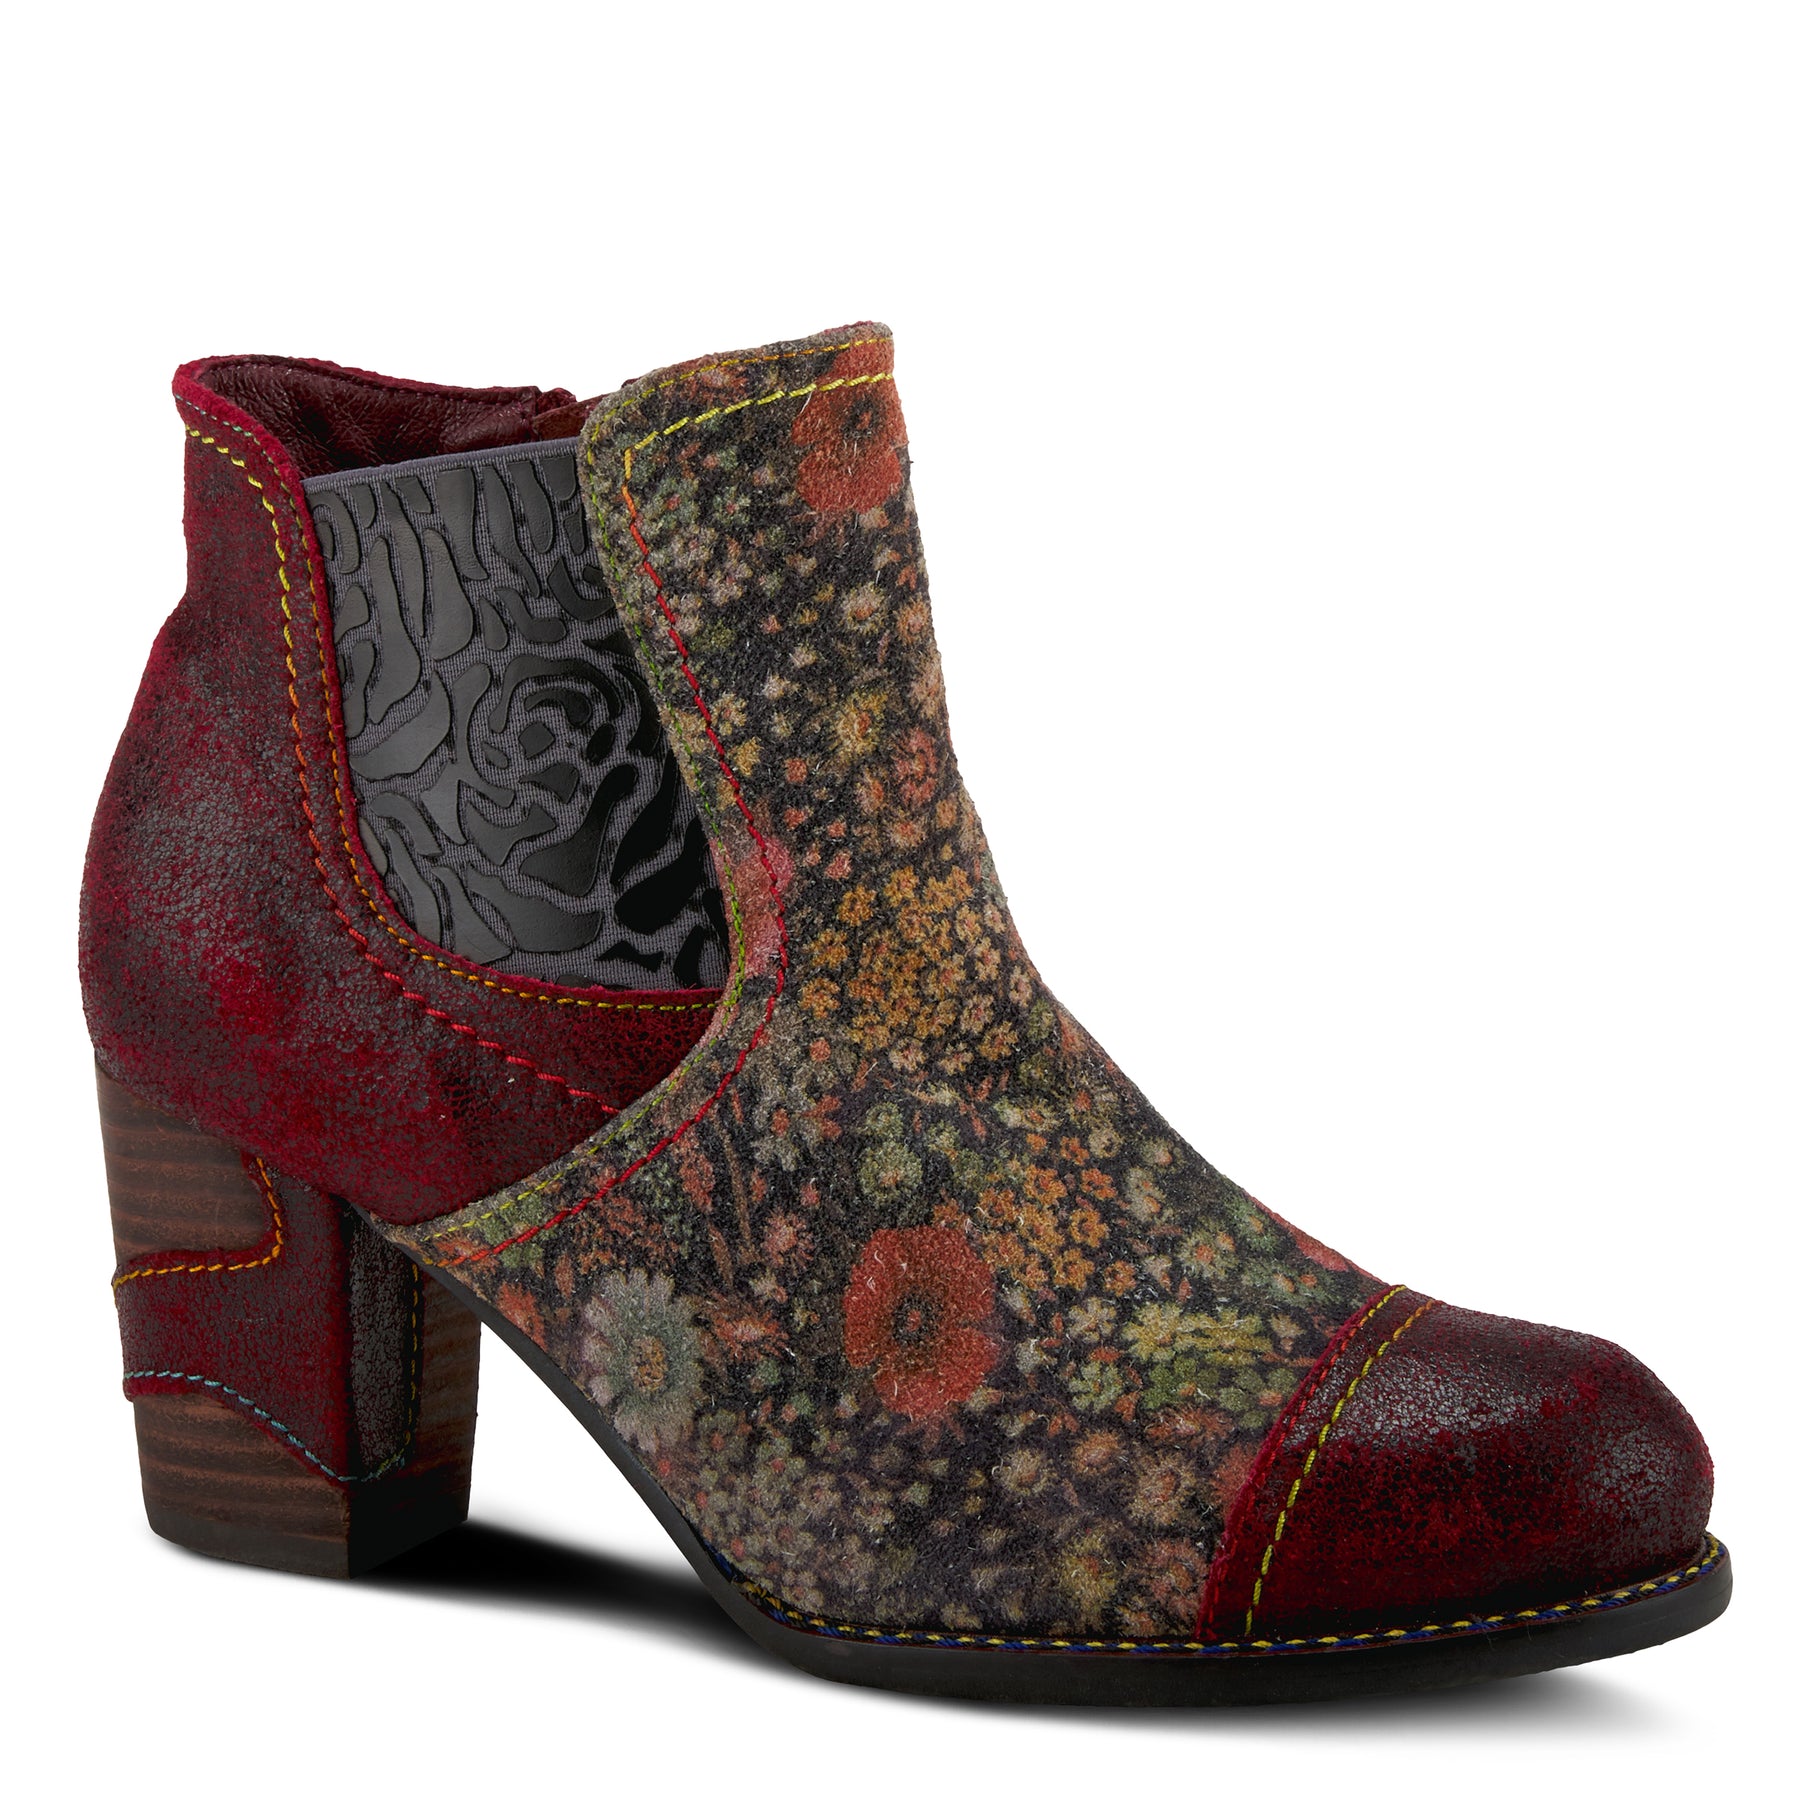 MELVINA BOOTIE by L'ARTISTE – Spring Step Shoes